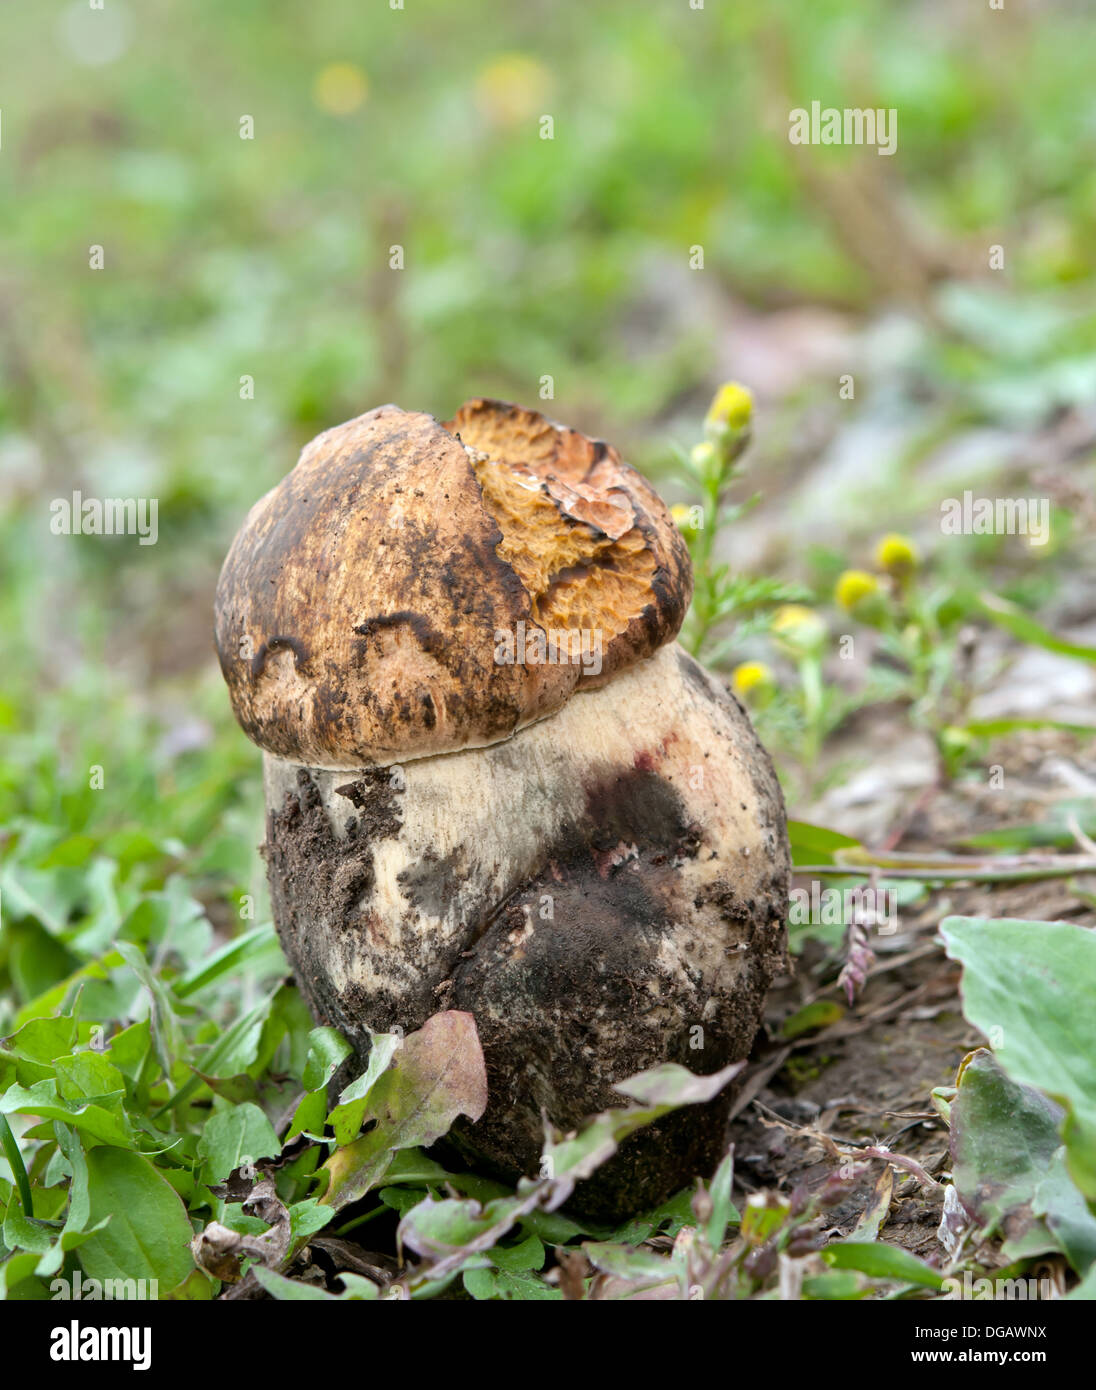 forest mushroom in green grass Stock Photo